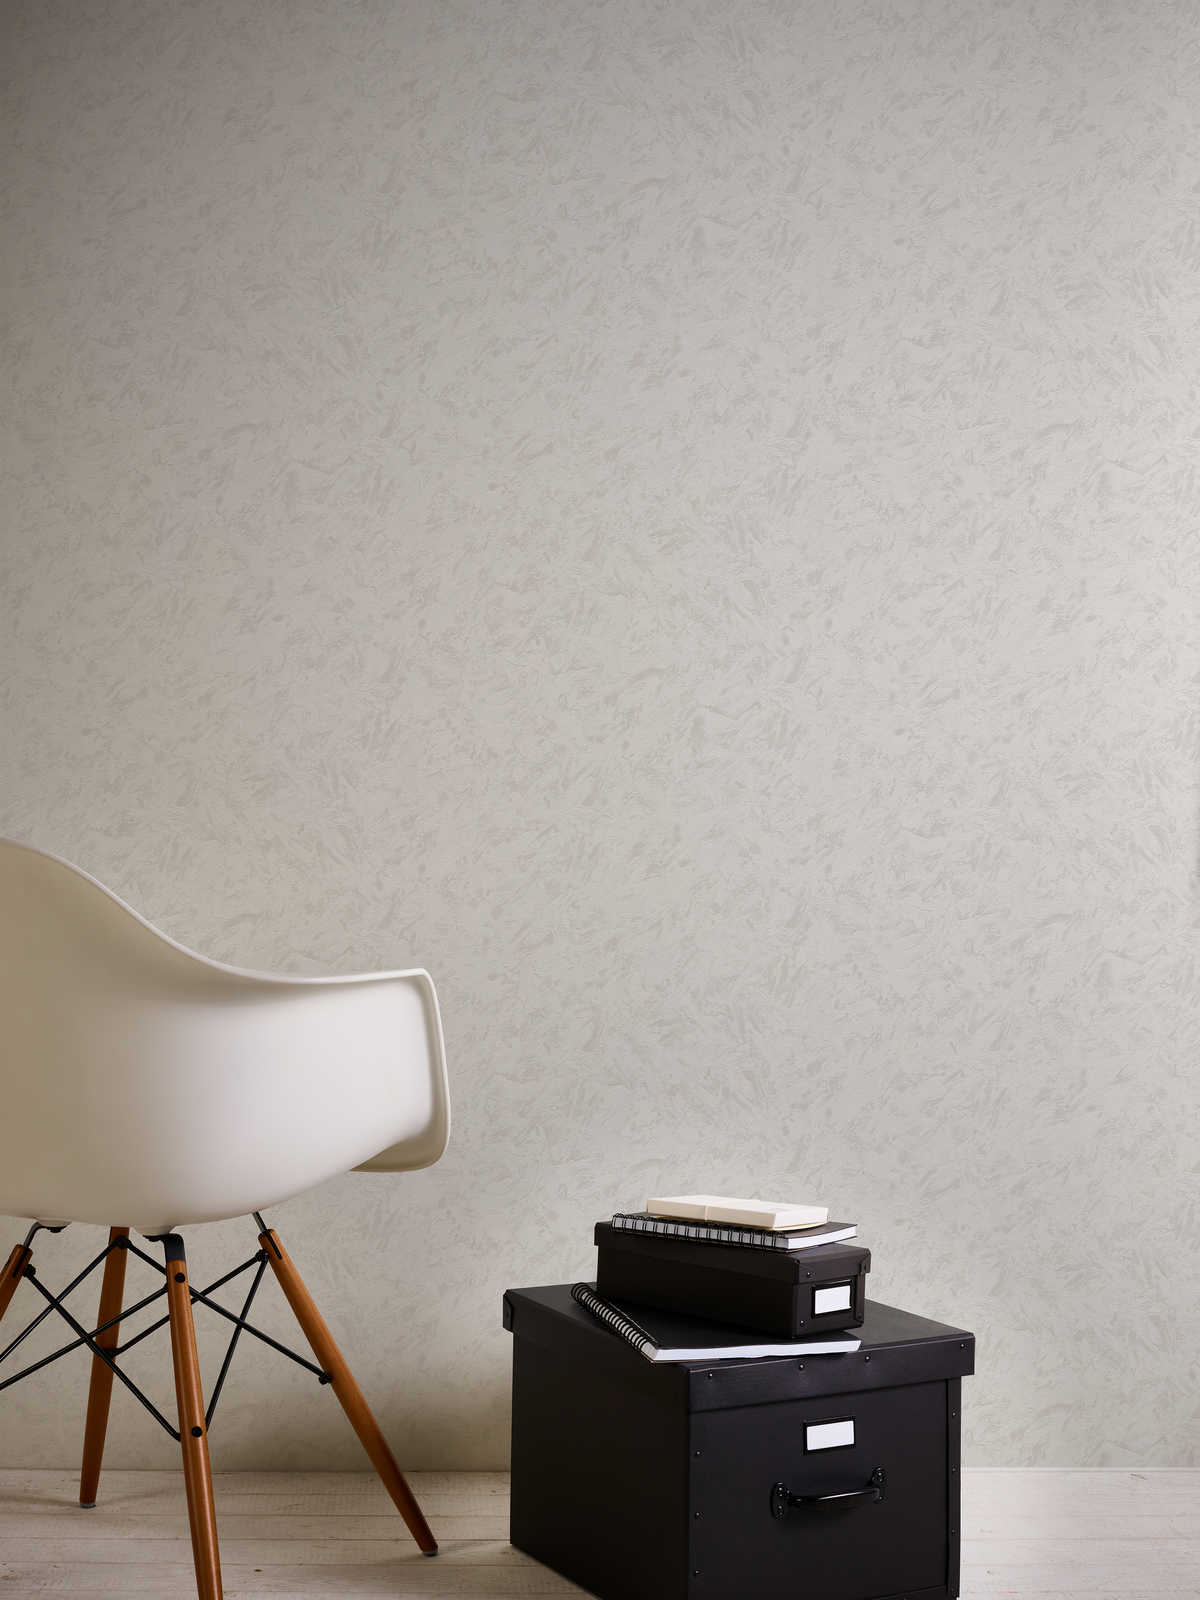             Plain wallpaper with wiped plaster look - beige, cream
        